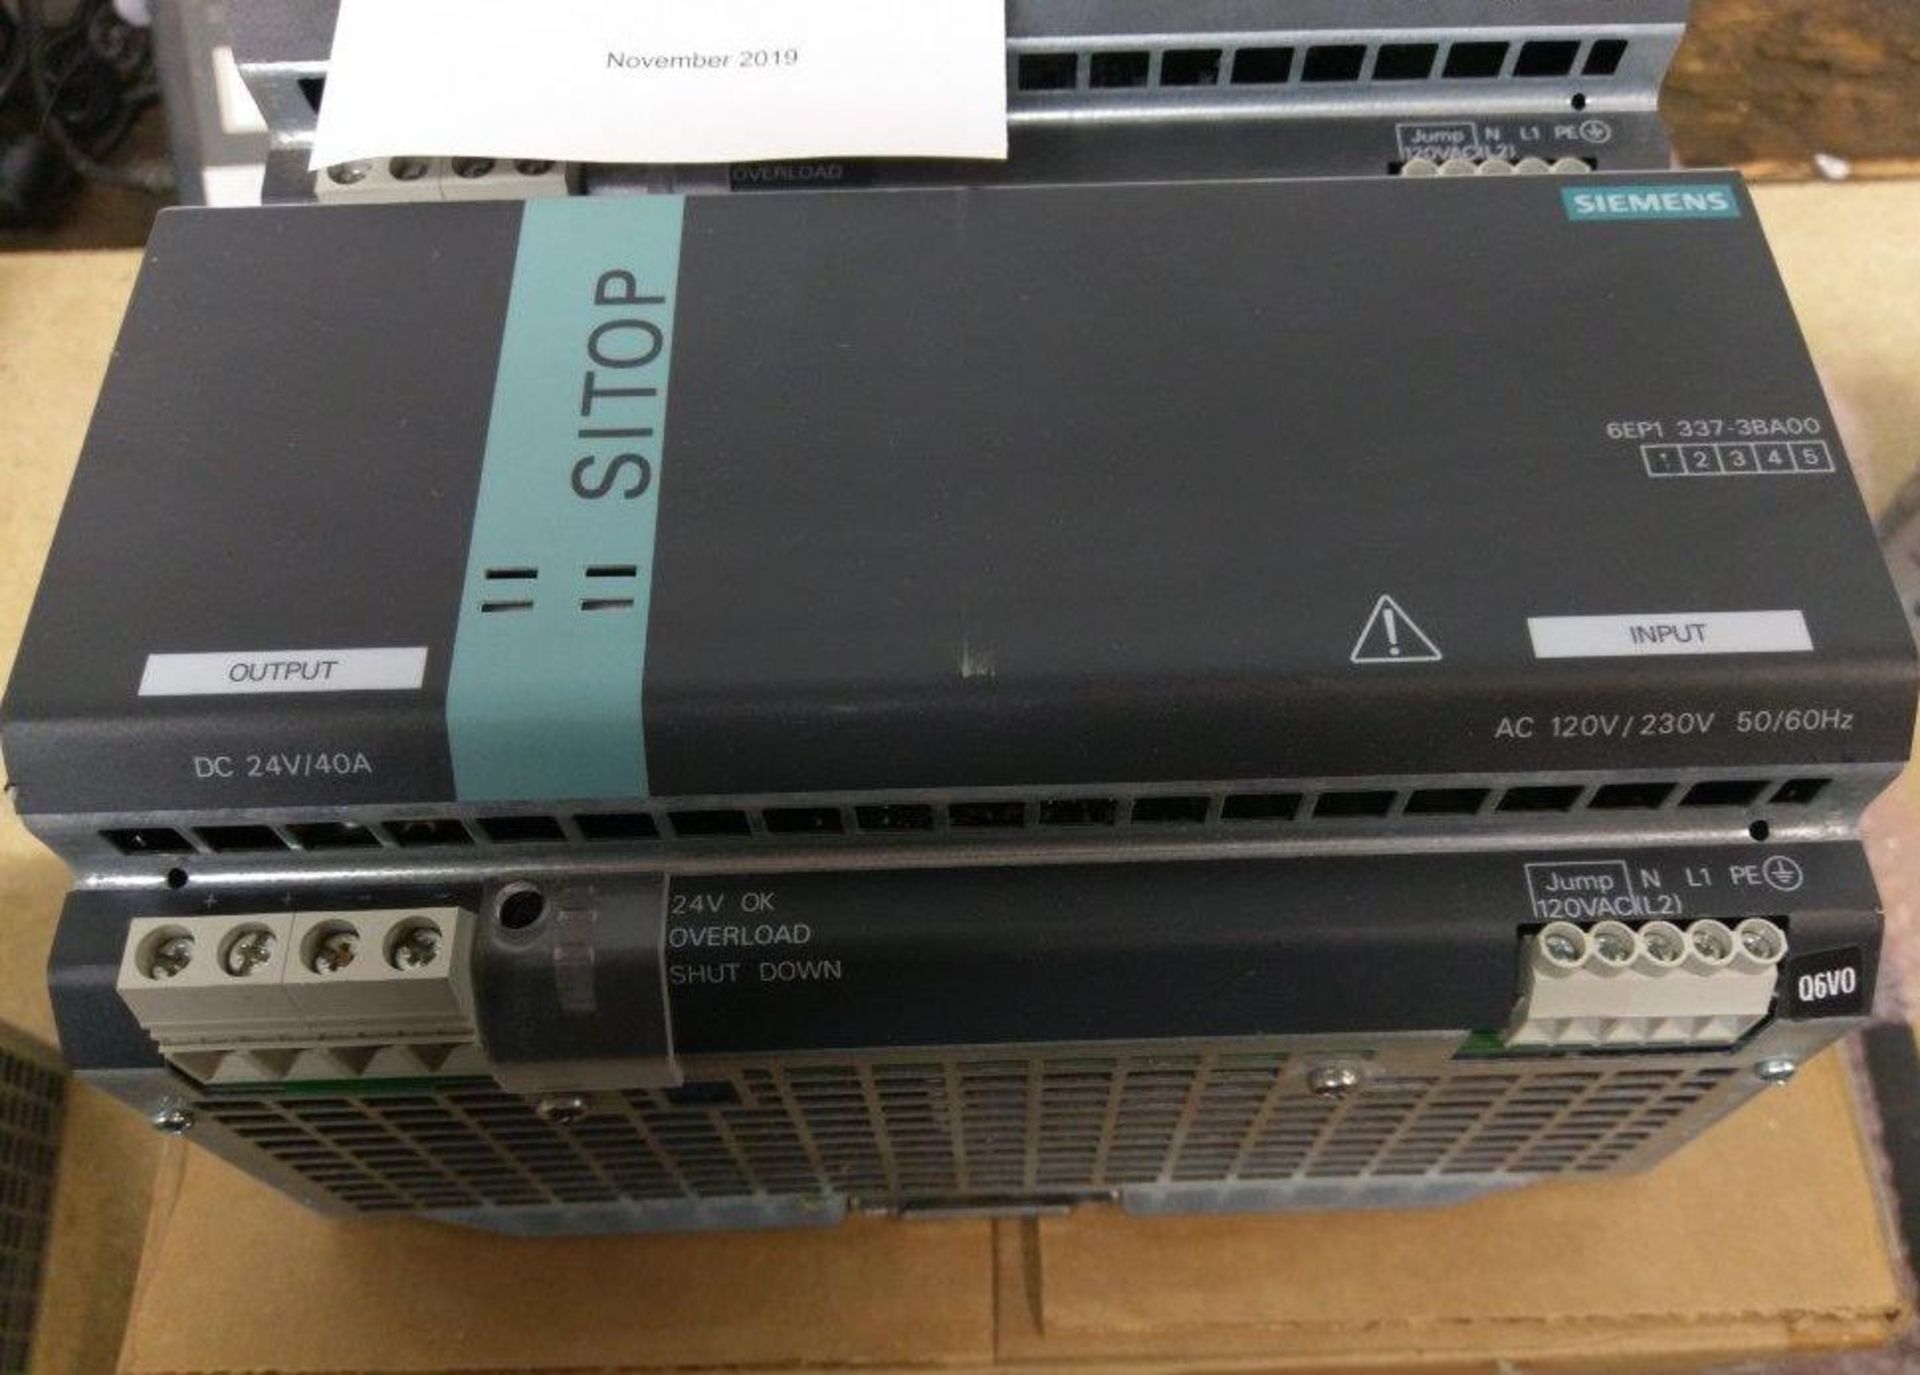 Lot of 5 Siemens SITOP Power Supply Model 1P 6EP1337-3BA00 - Image 2 of 3